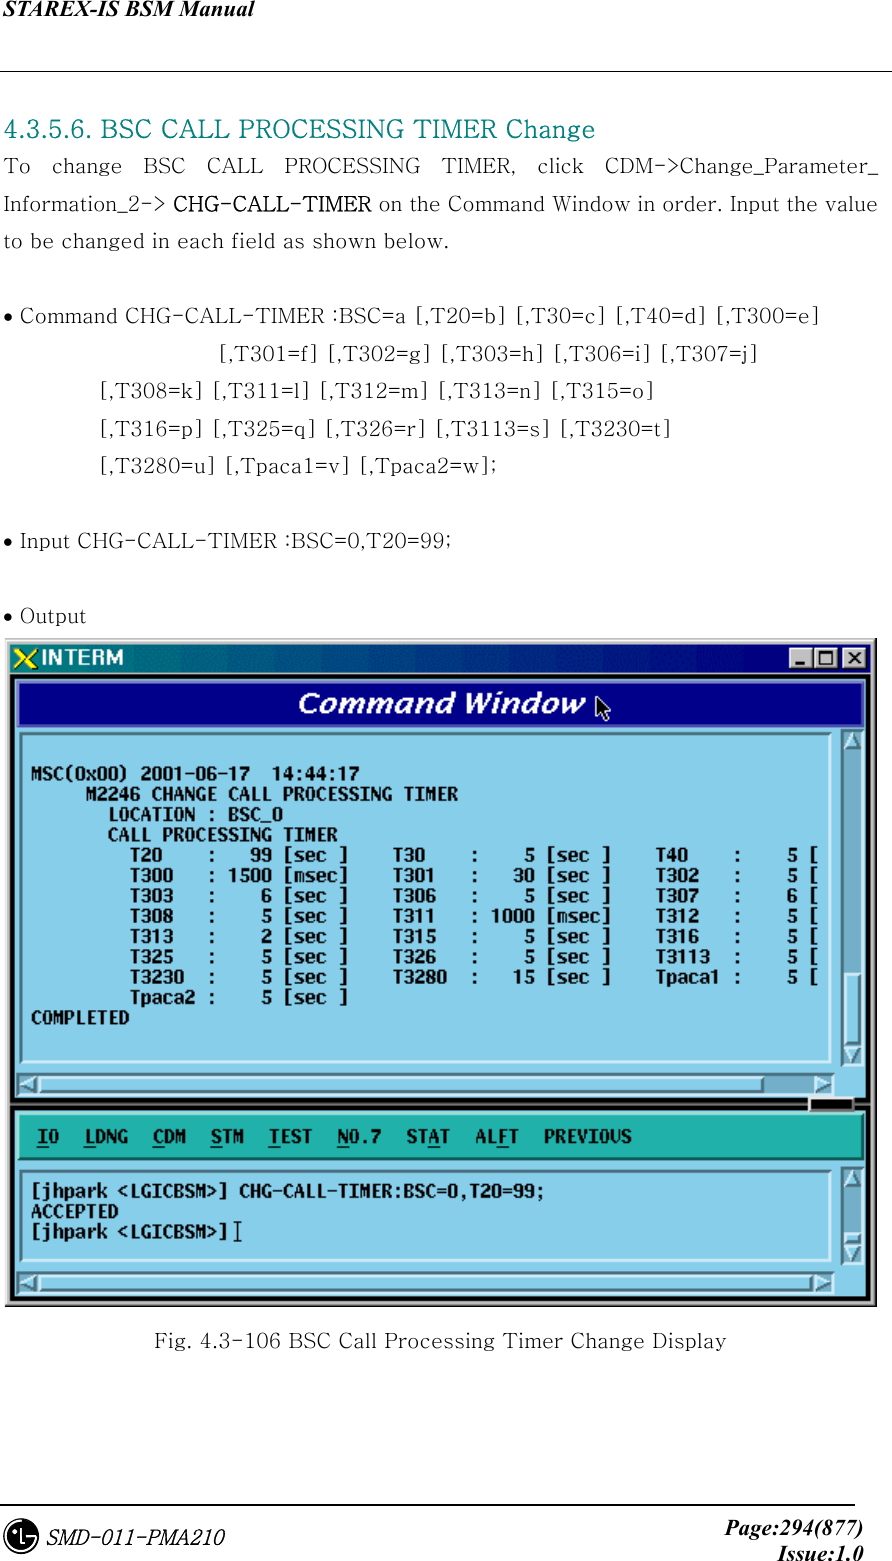 STAREX-IS BSM Manual     Page:294(877)Issue:1.0SMD-011-PMA210  4.3.5.6. BSC CALL PROCESSING TIMER Change To change BSC CALL PROCESSING TIMER, click CDM-&gt;Change_Parameter_ Information_2-&gt; CHG-CALL-TIMER on the Command Window in order. Input the value to be changed in each field as shown below.  • Command CHG-CALL-TIMER :BSC=a [,T20=b] [,T30=c] [,T40=d] [,T300=e]          [,T301=f] [,T302=g] [,T303=h] [,T306=i] [,T307=j]          [,T308=k] [,T311=l] [,T312=m] [,T313=n] [,T315=o]          [,T316=p] [,T325=q] [,T326=r] [,T3113=s] [,T3230=t]          [,T3280=u] [,Tpaca1=v] [,Tpaca2=w];  • Input CHG-CALL-TIMER :BSC=0,T20=99;  • Output  Fig. 4.3-106 BSC Call Processing Timer Change Display  